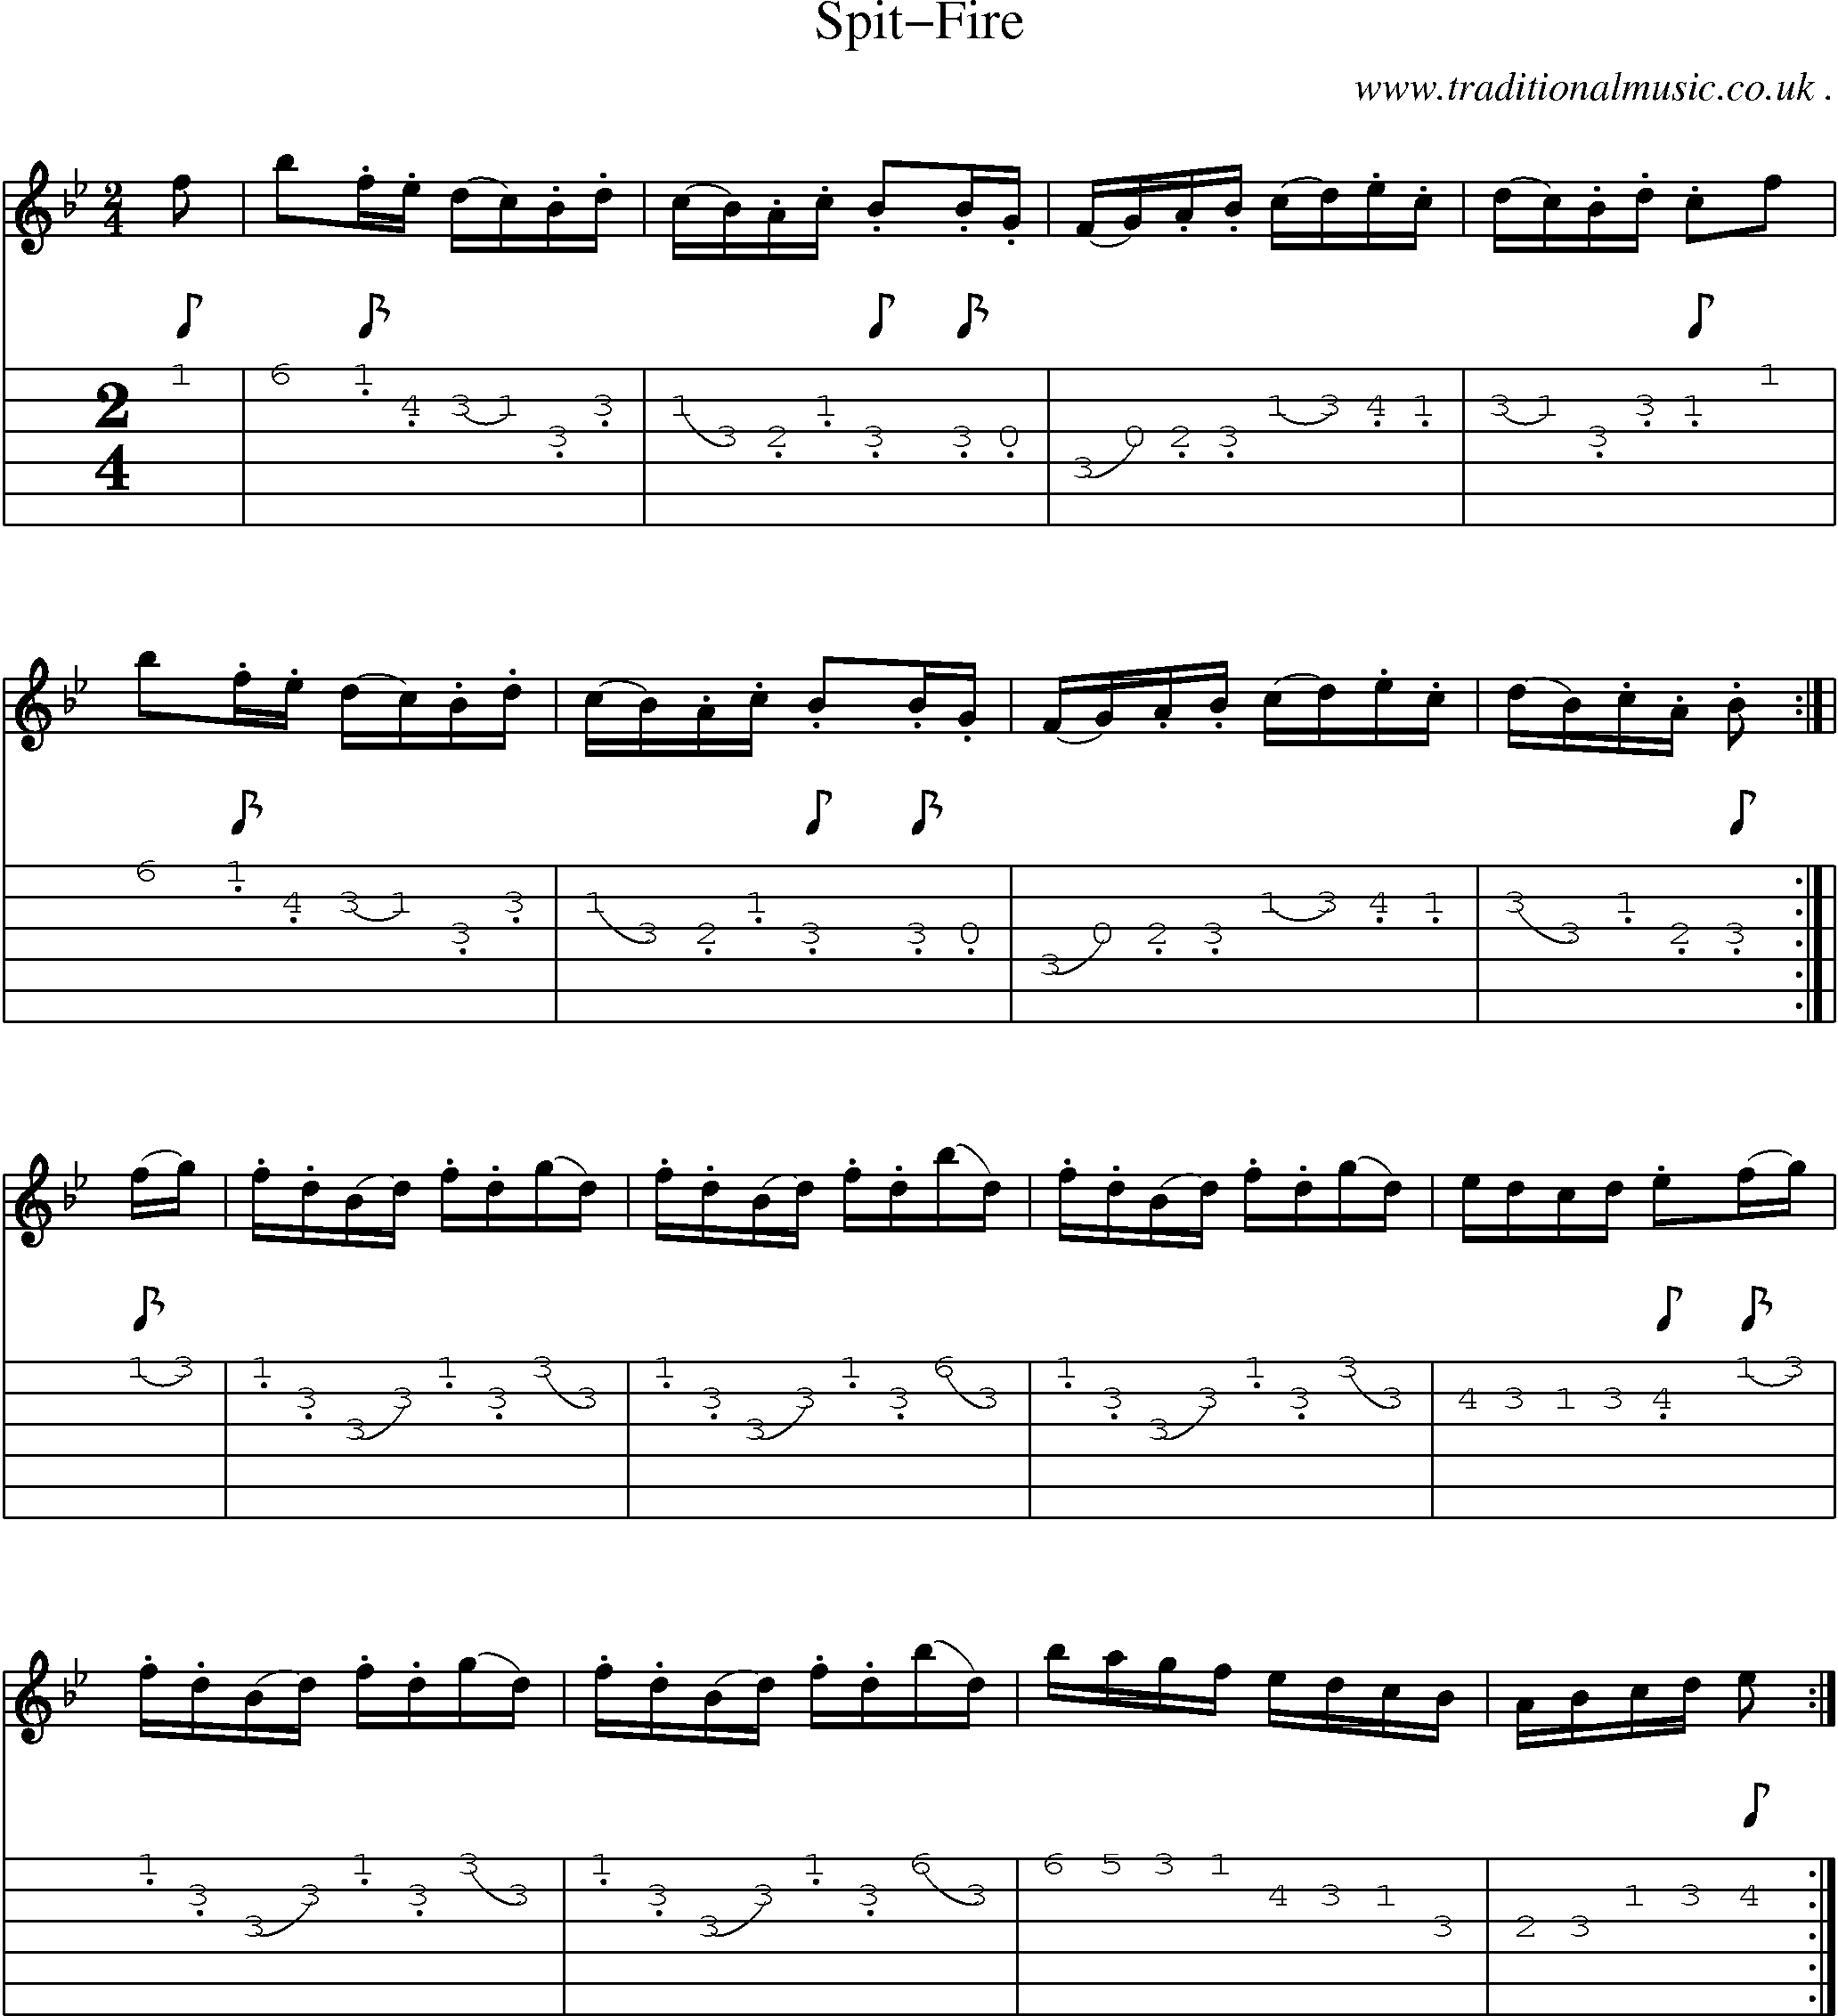 Sheet-Music and Guitar Tabs for Spit-fire